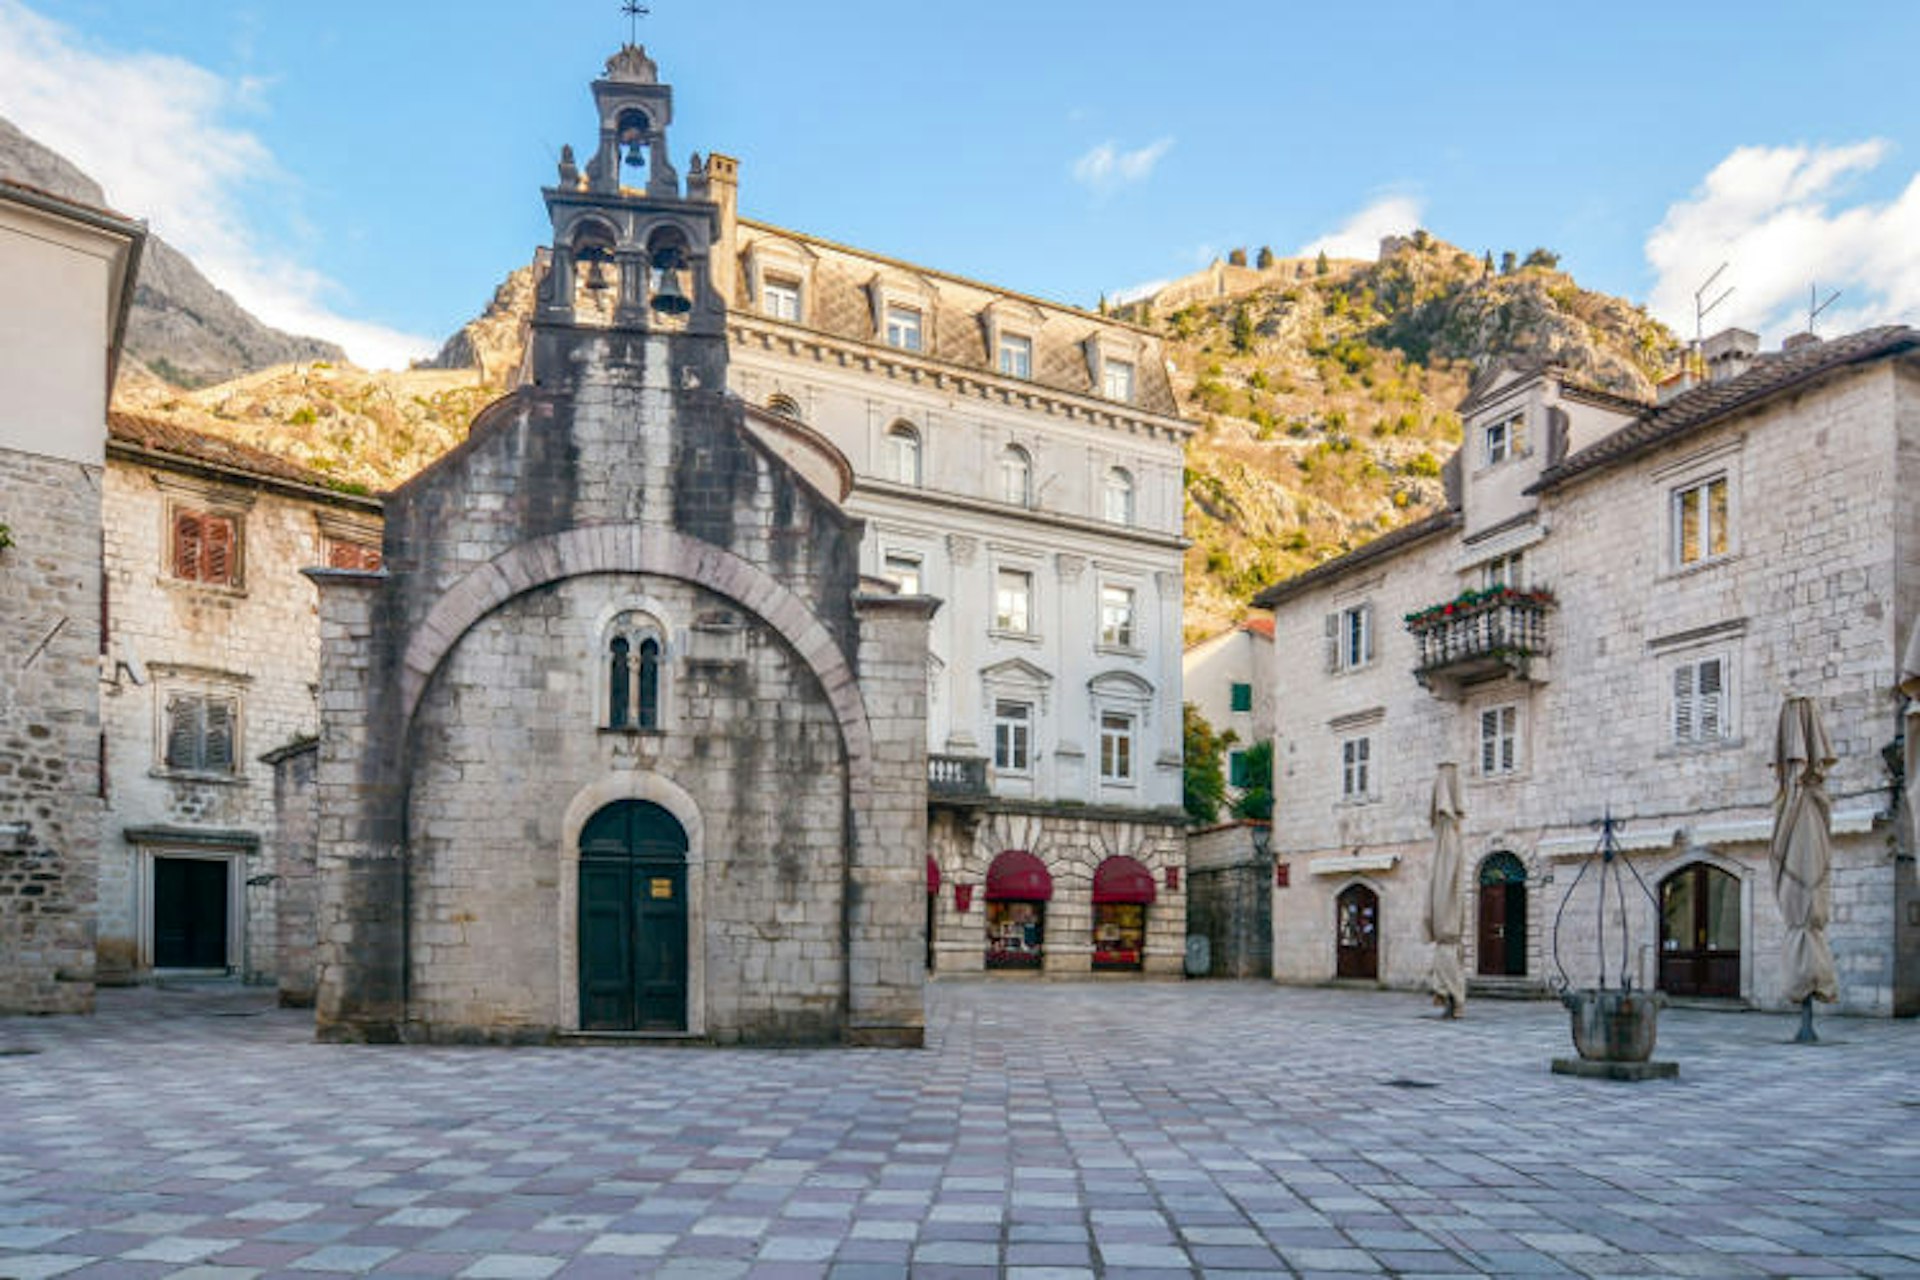 St Luke’s Church in Kotor used to have both a Catholic and an Orthodox altar. Image by valram / Getty Images